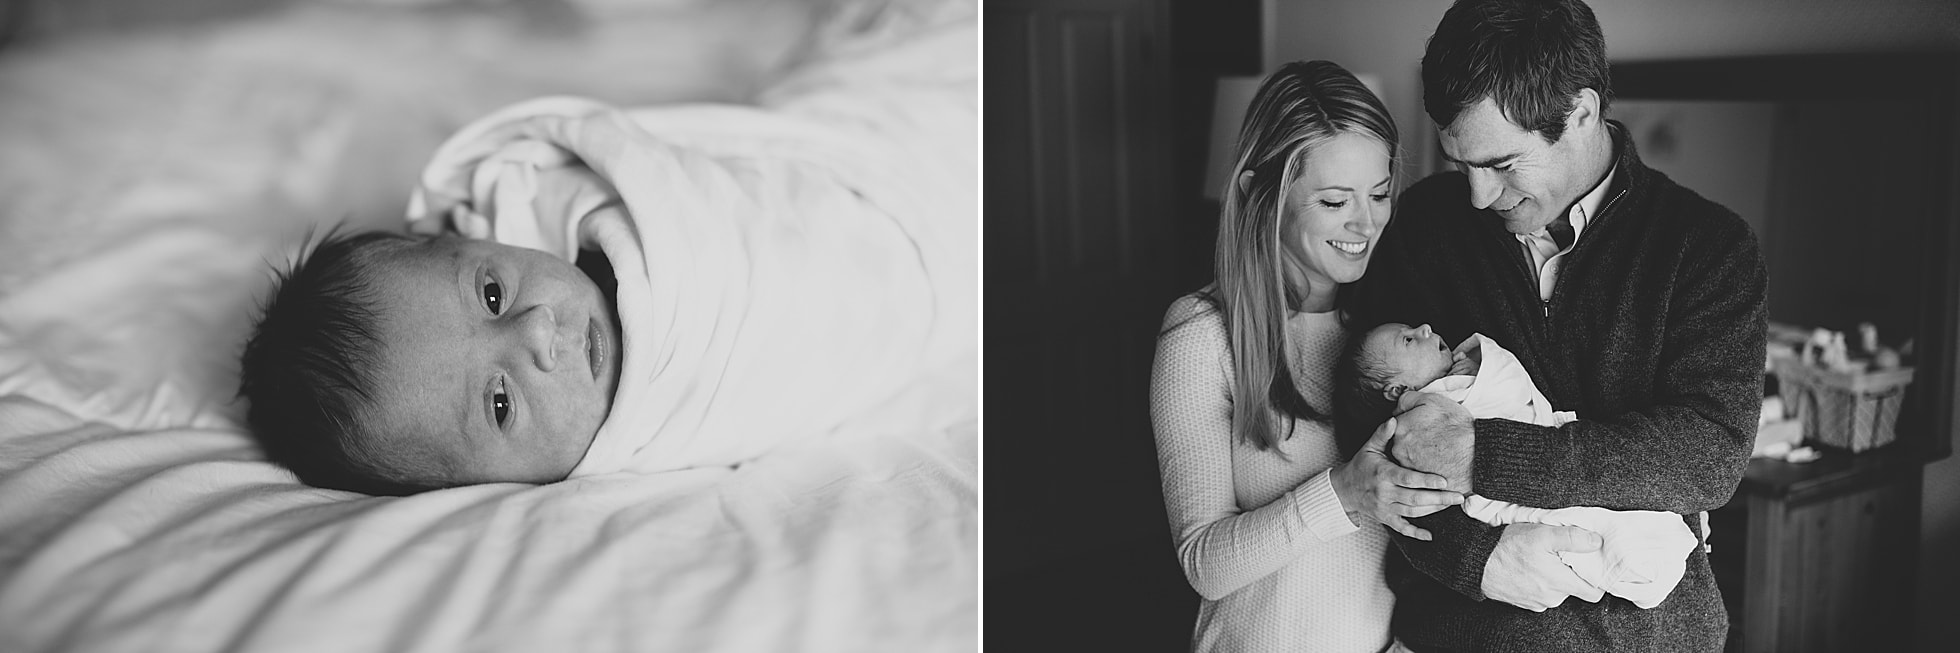 Black-and-white lifestyle portraits during a newborn photography session - Charlottesville, Virginia